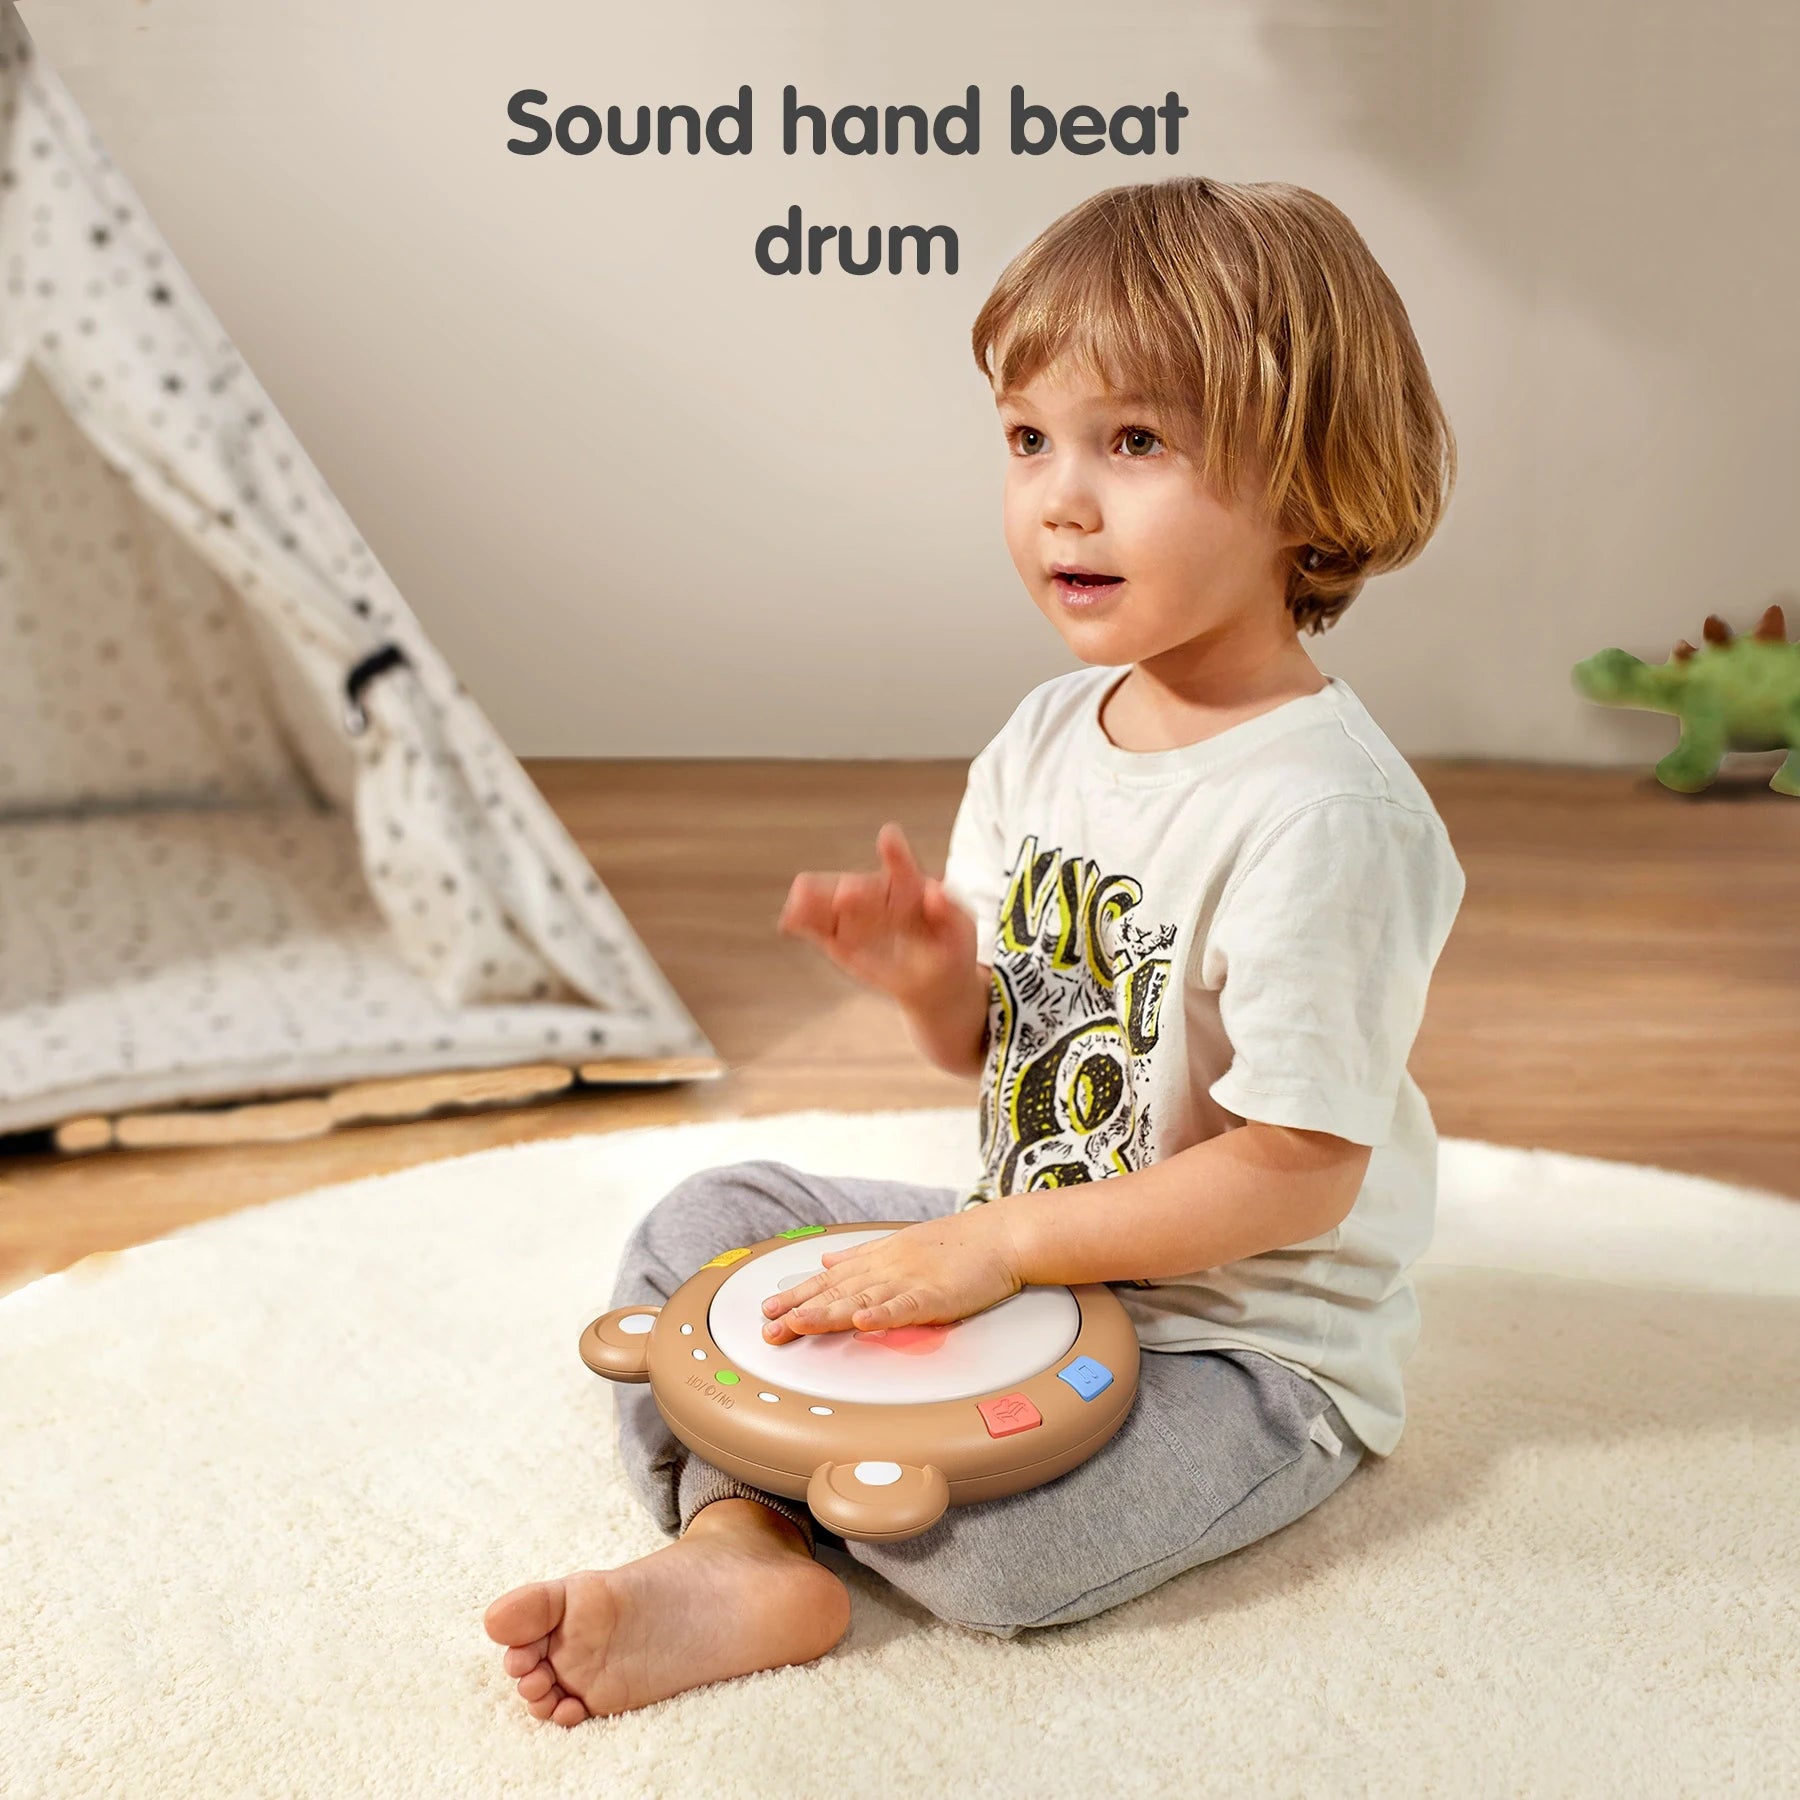 Baby's educational electronic drum toy